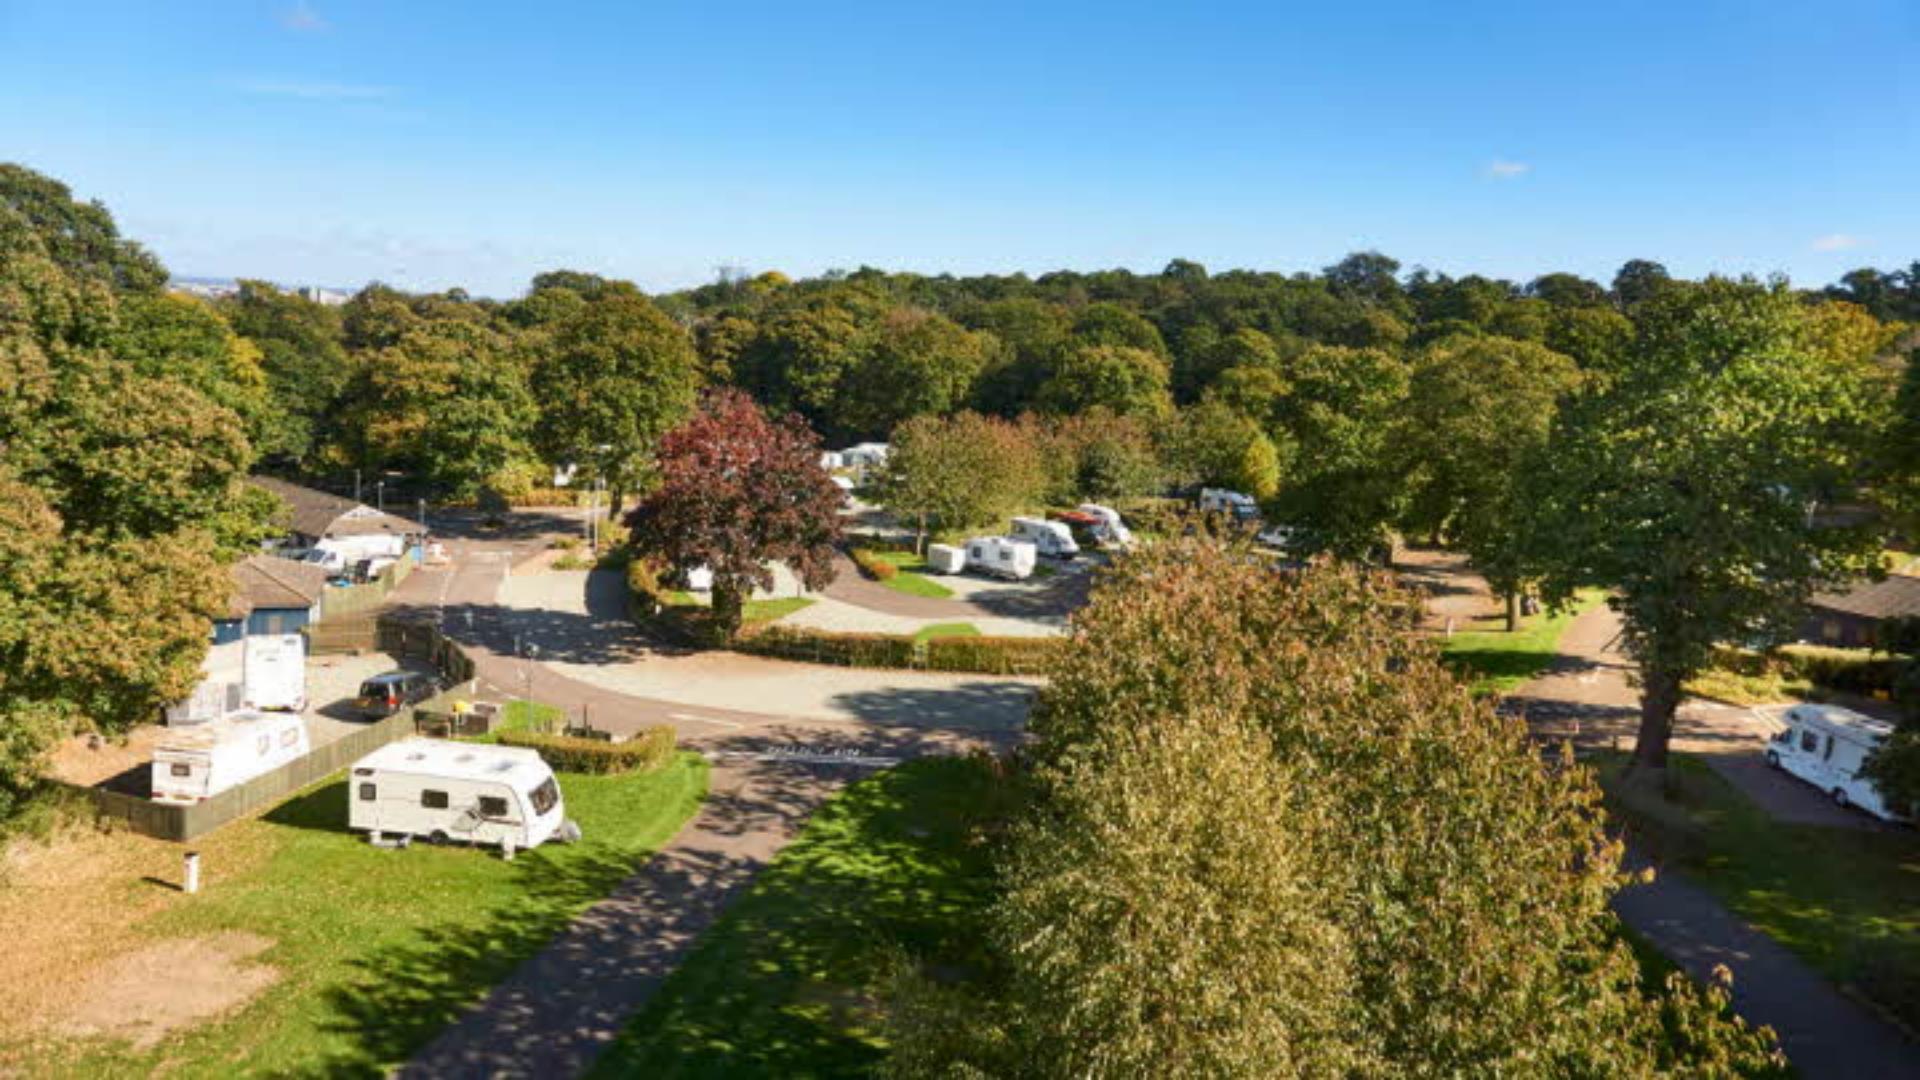 Tents and caravans nestled amongst beautiful green trees in Abbey Wood Caravan and Camping park, Greenwich.